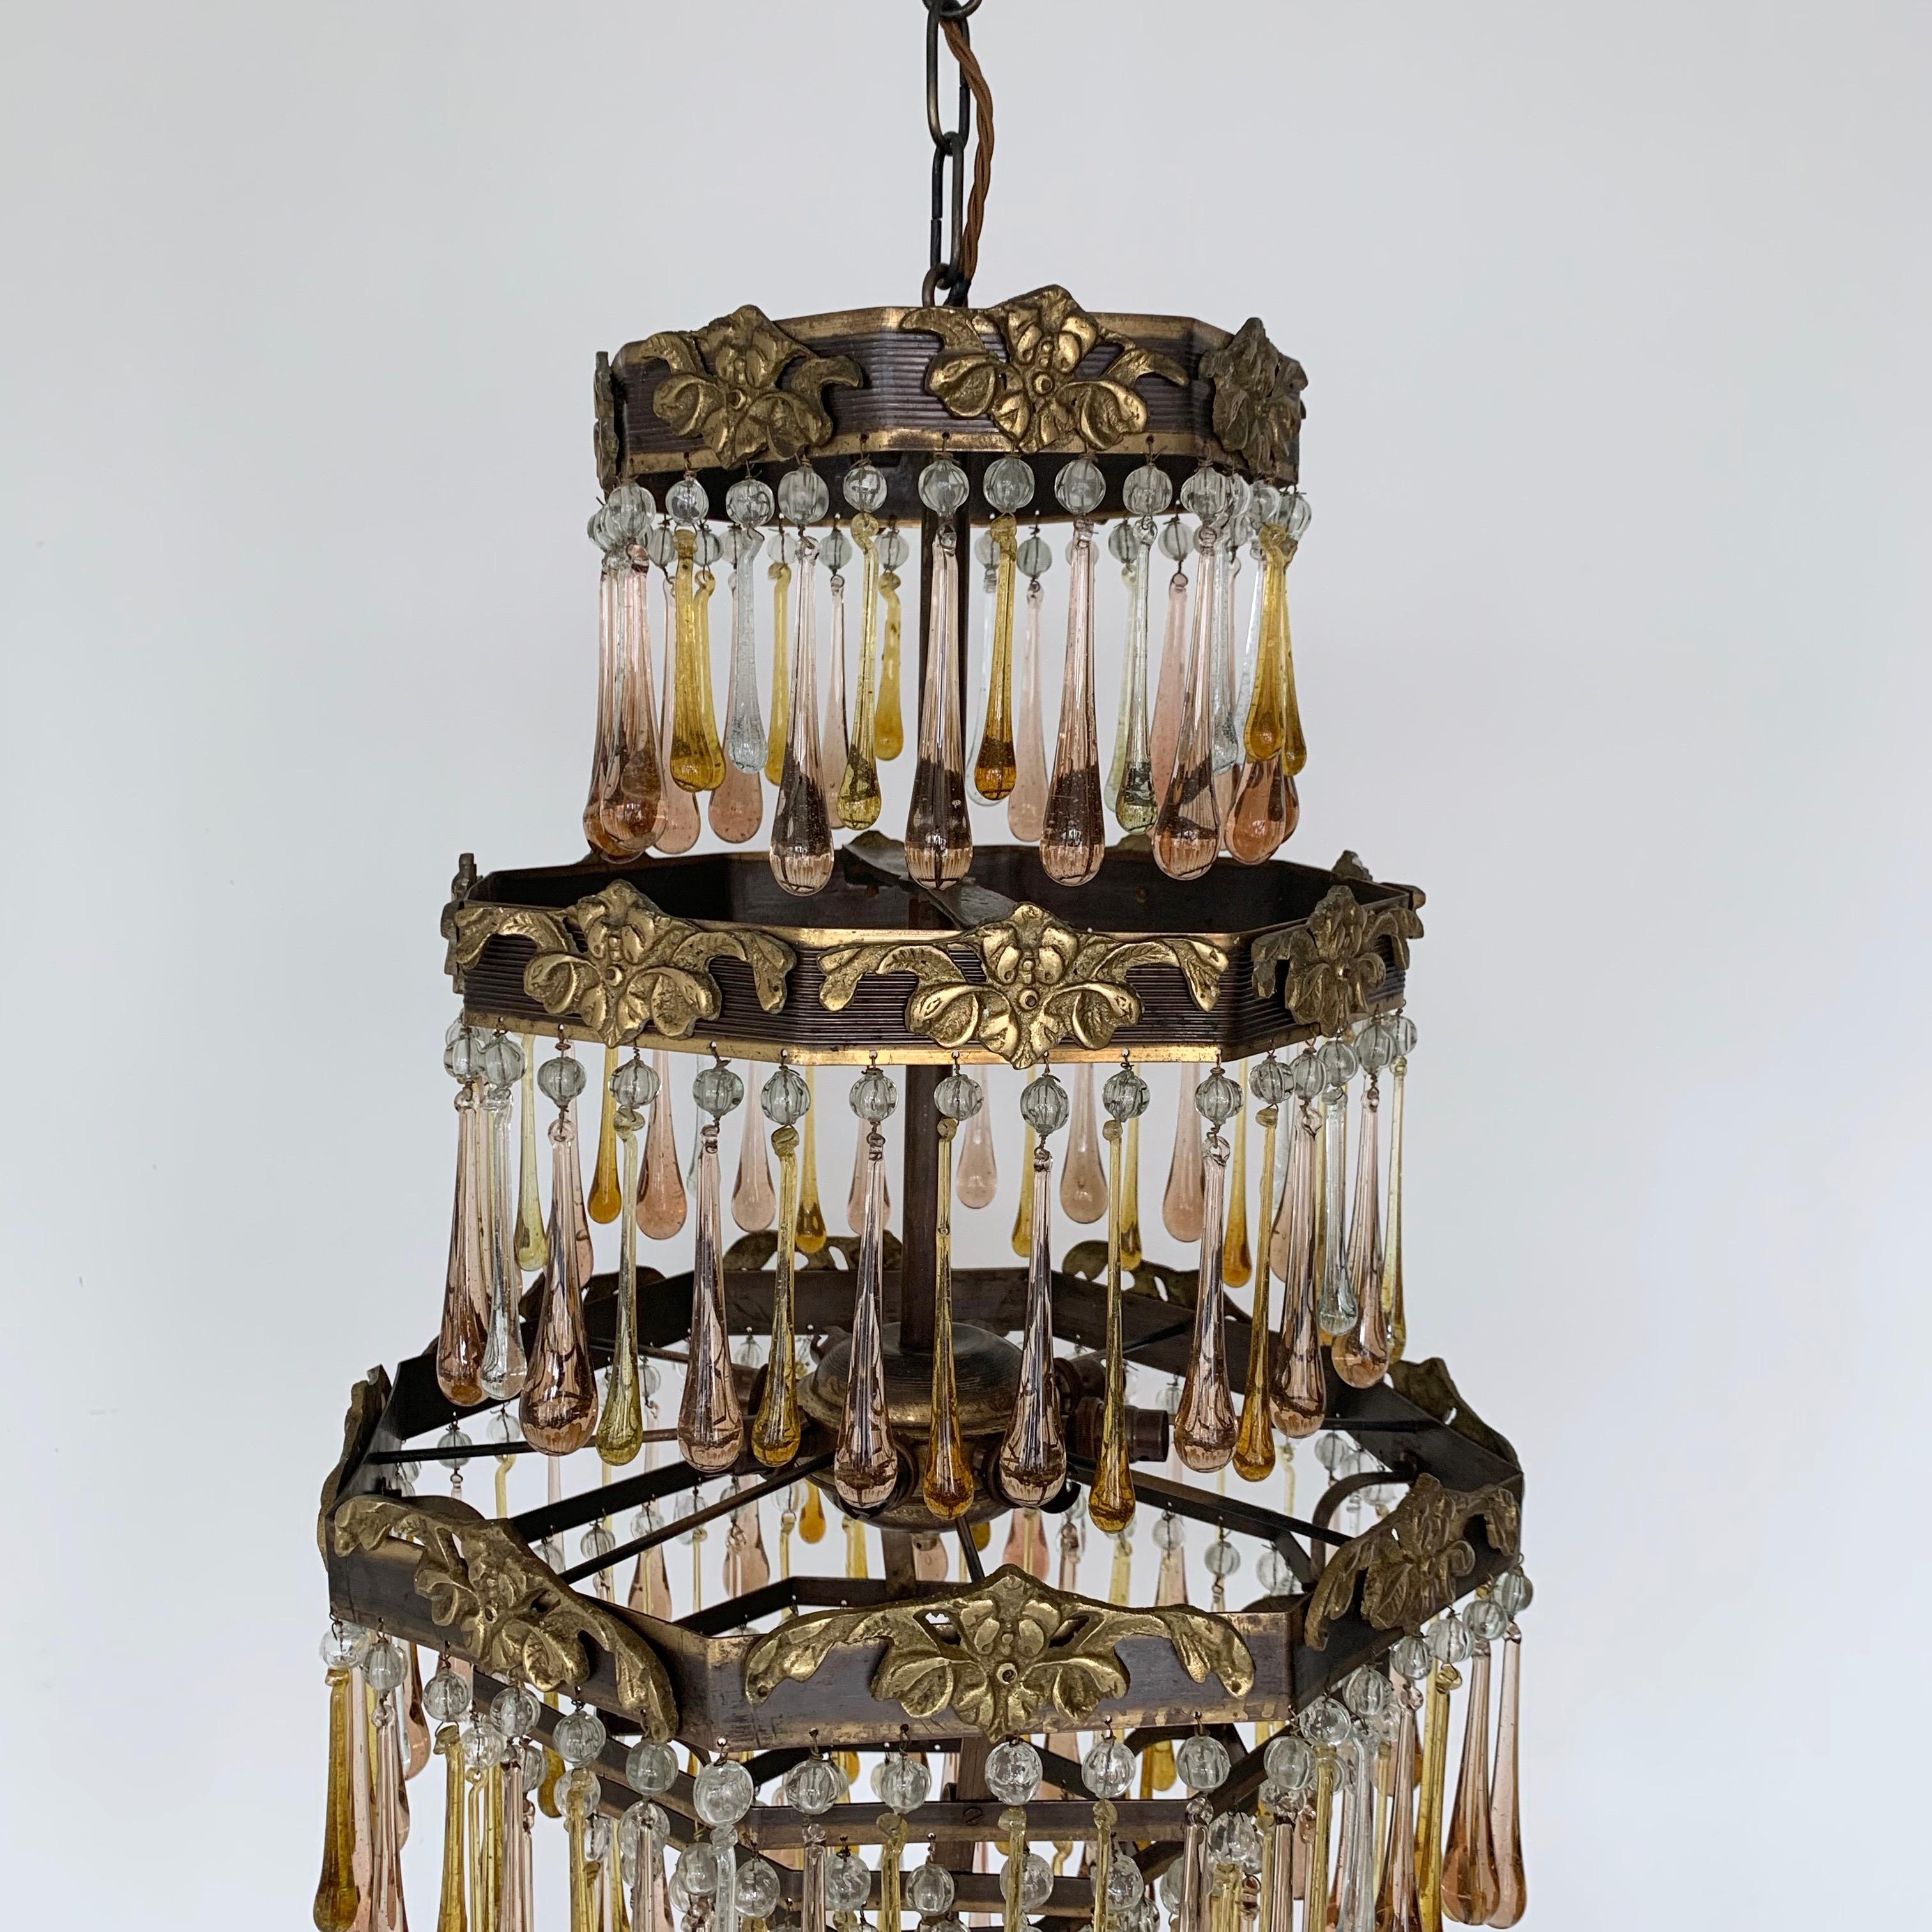 Early 1900s French Brass Waterfall Chandelier Frame Dressed in Peach and Amber For Sale 3